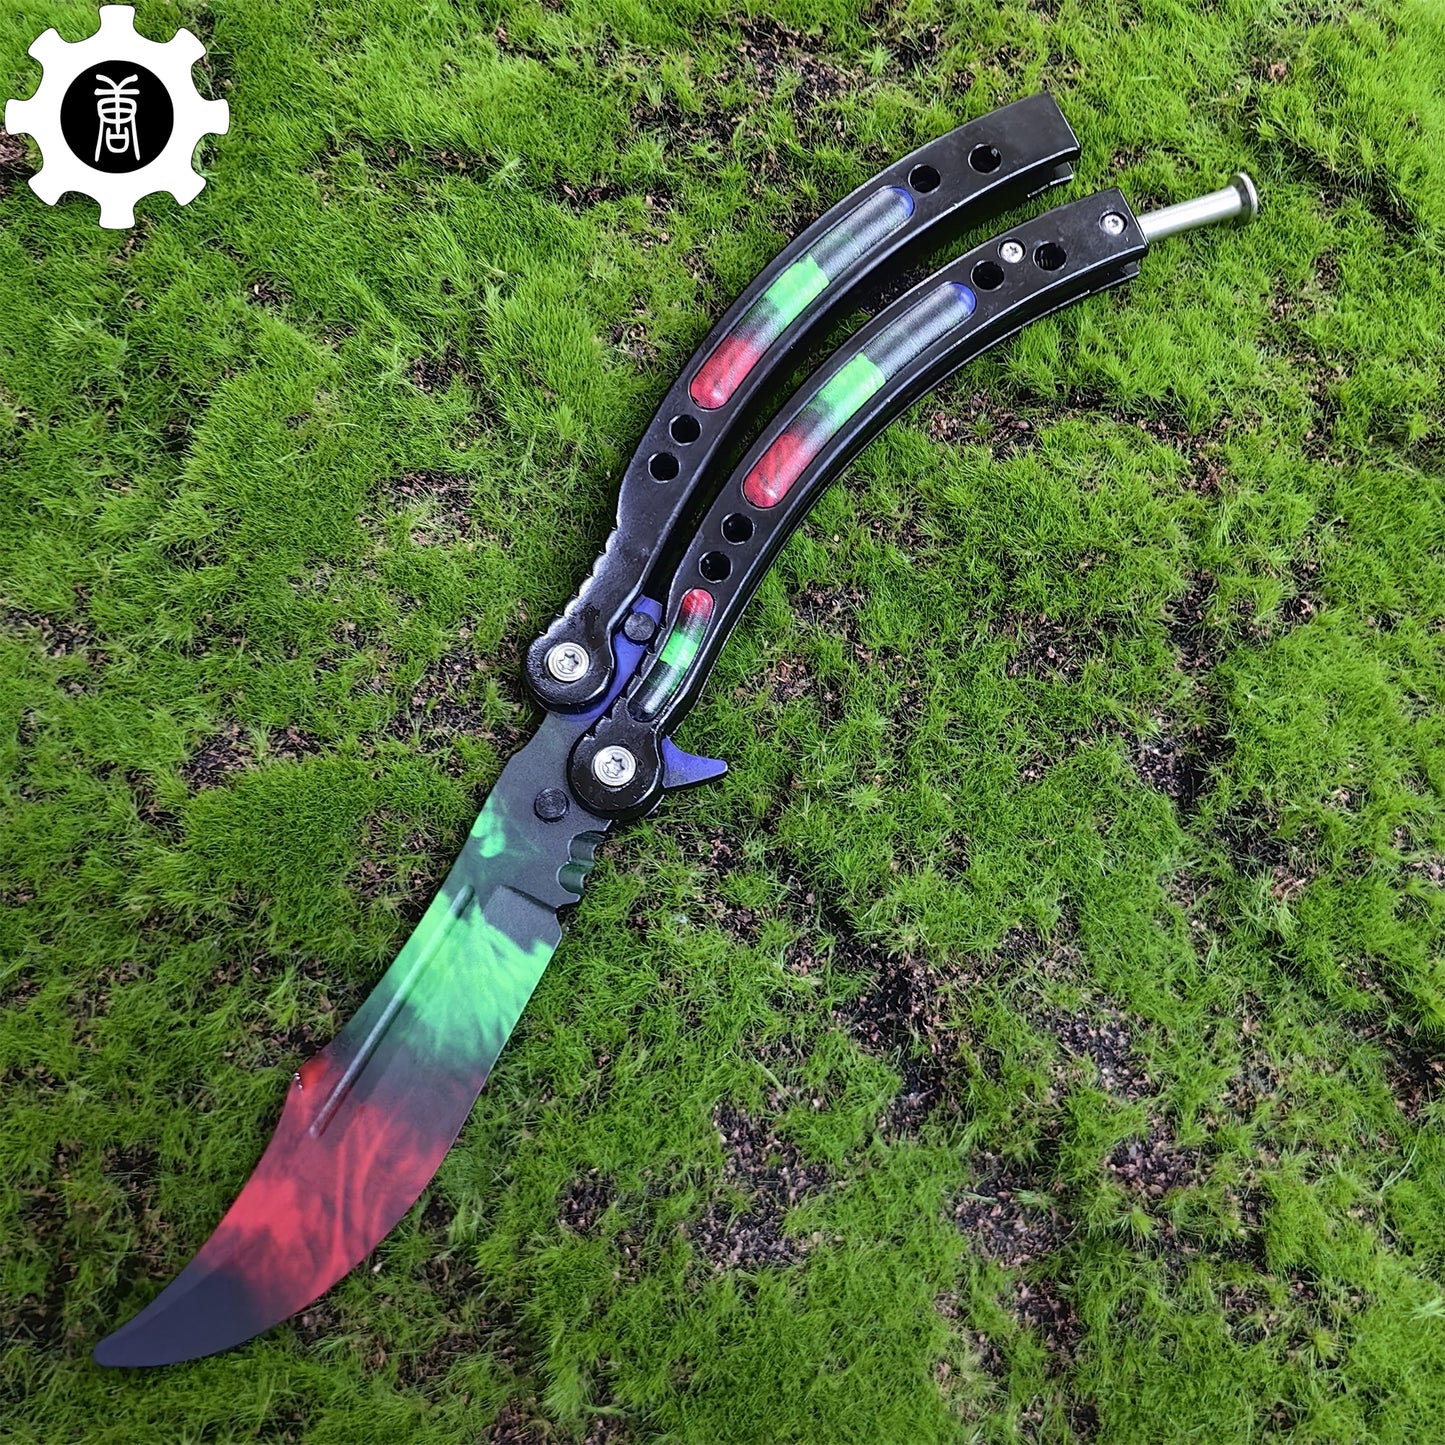 Game Butterfly Knife Green Red Pattern Metal Balisong Trainer